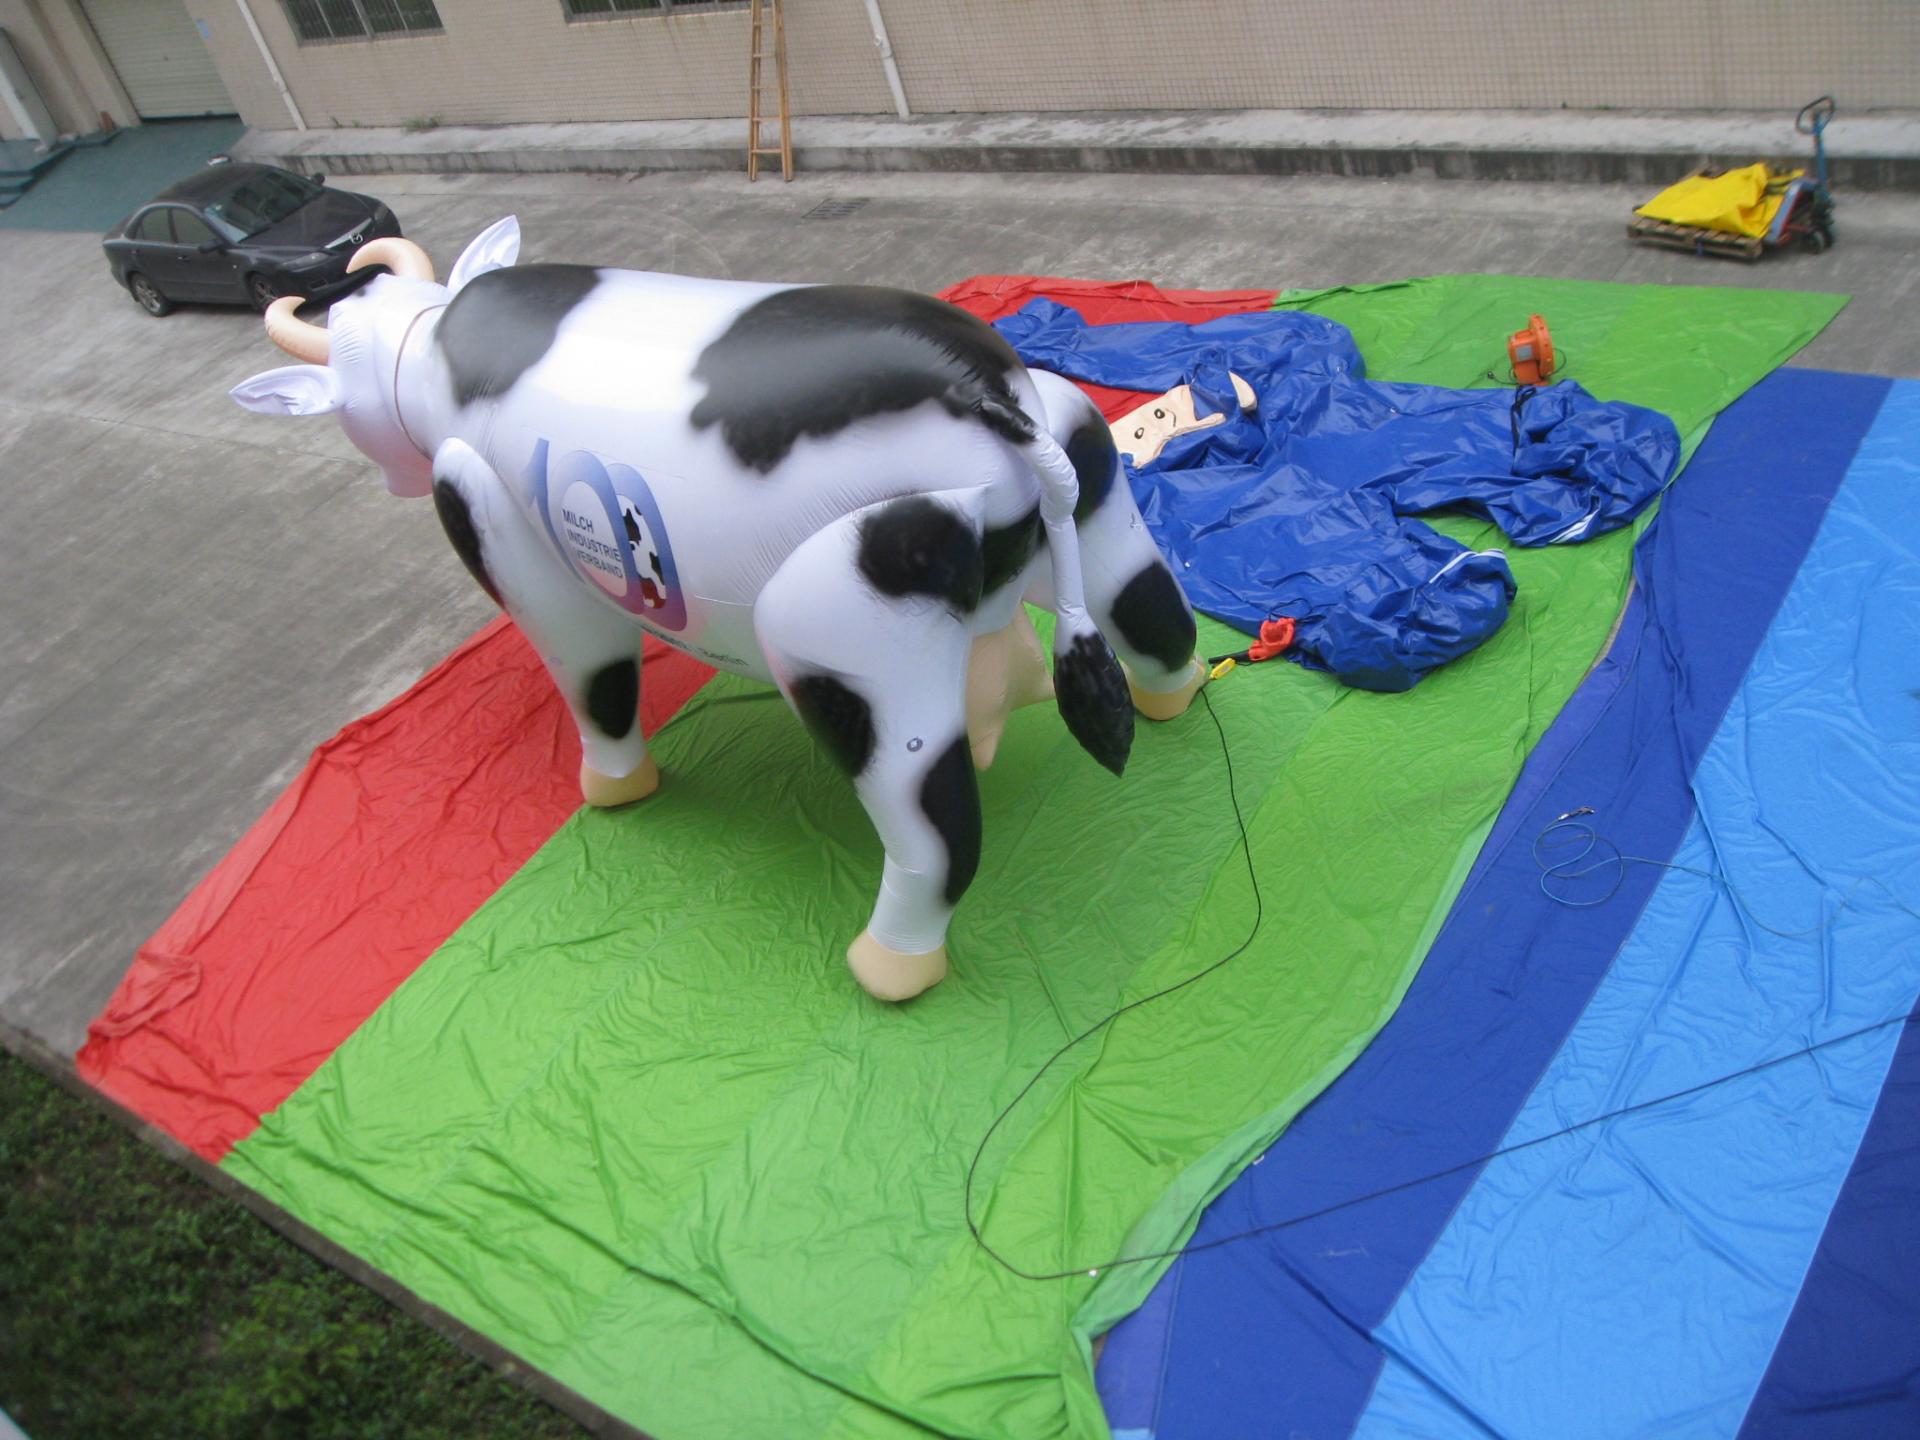 Customised Inflatable PVC Sealed Airtight Giant Large Cow For Advertising, Trade Showing